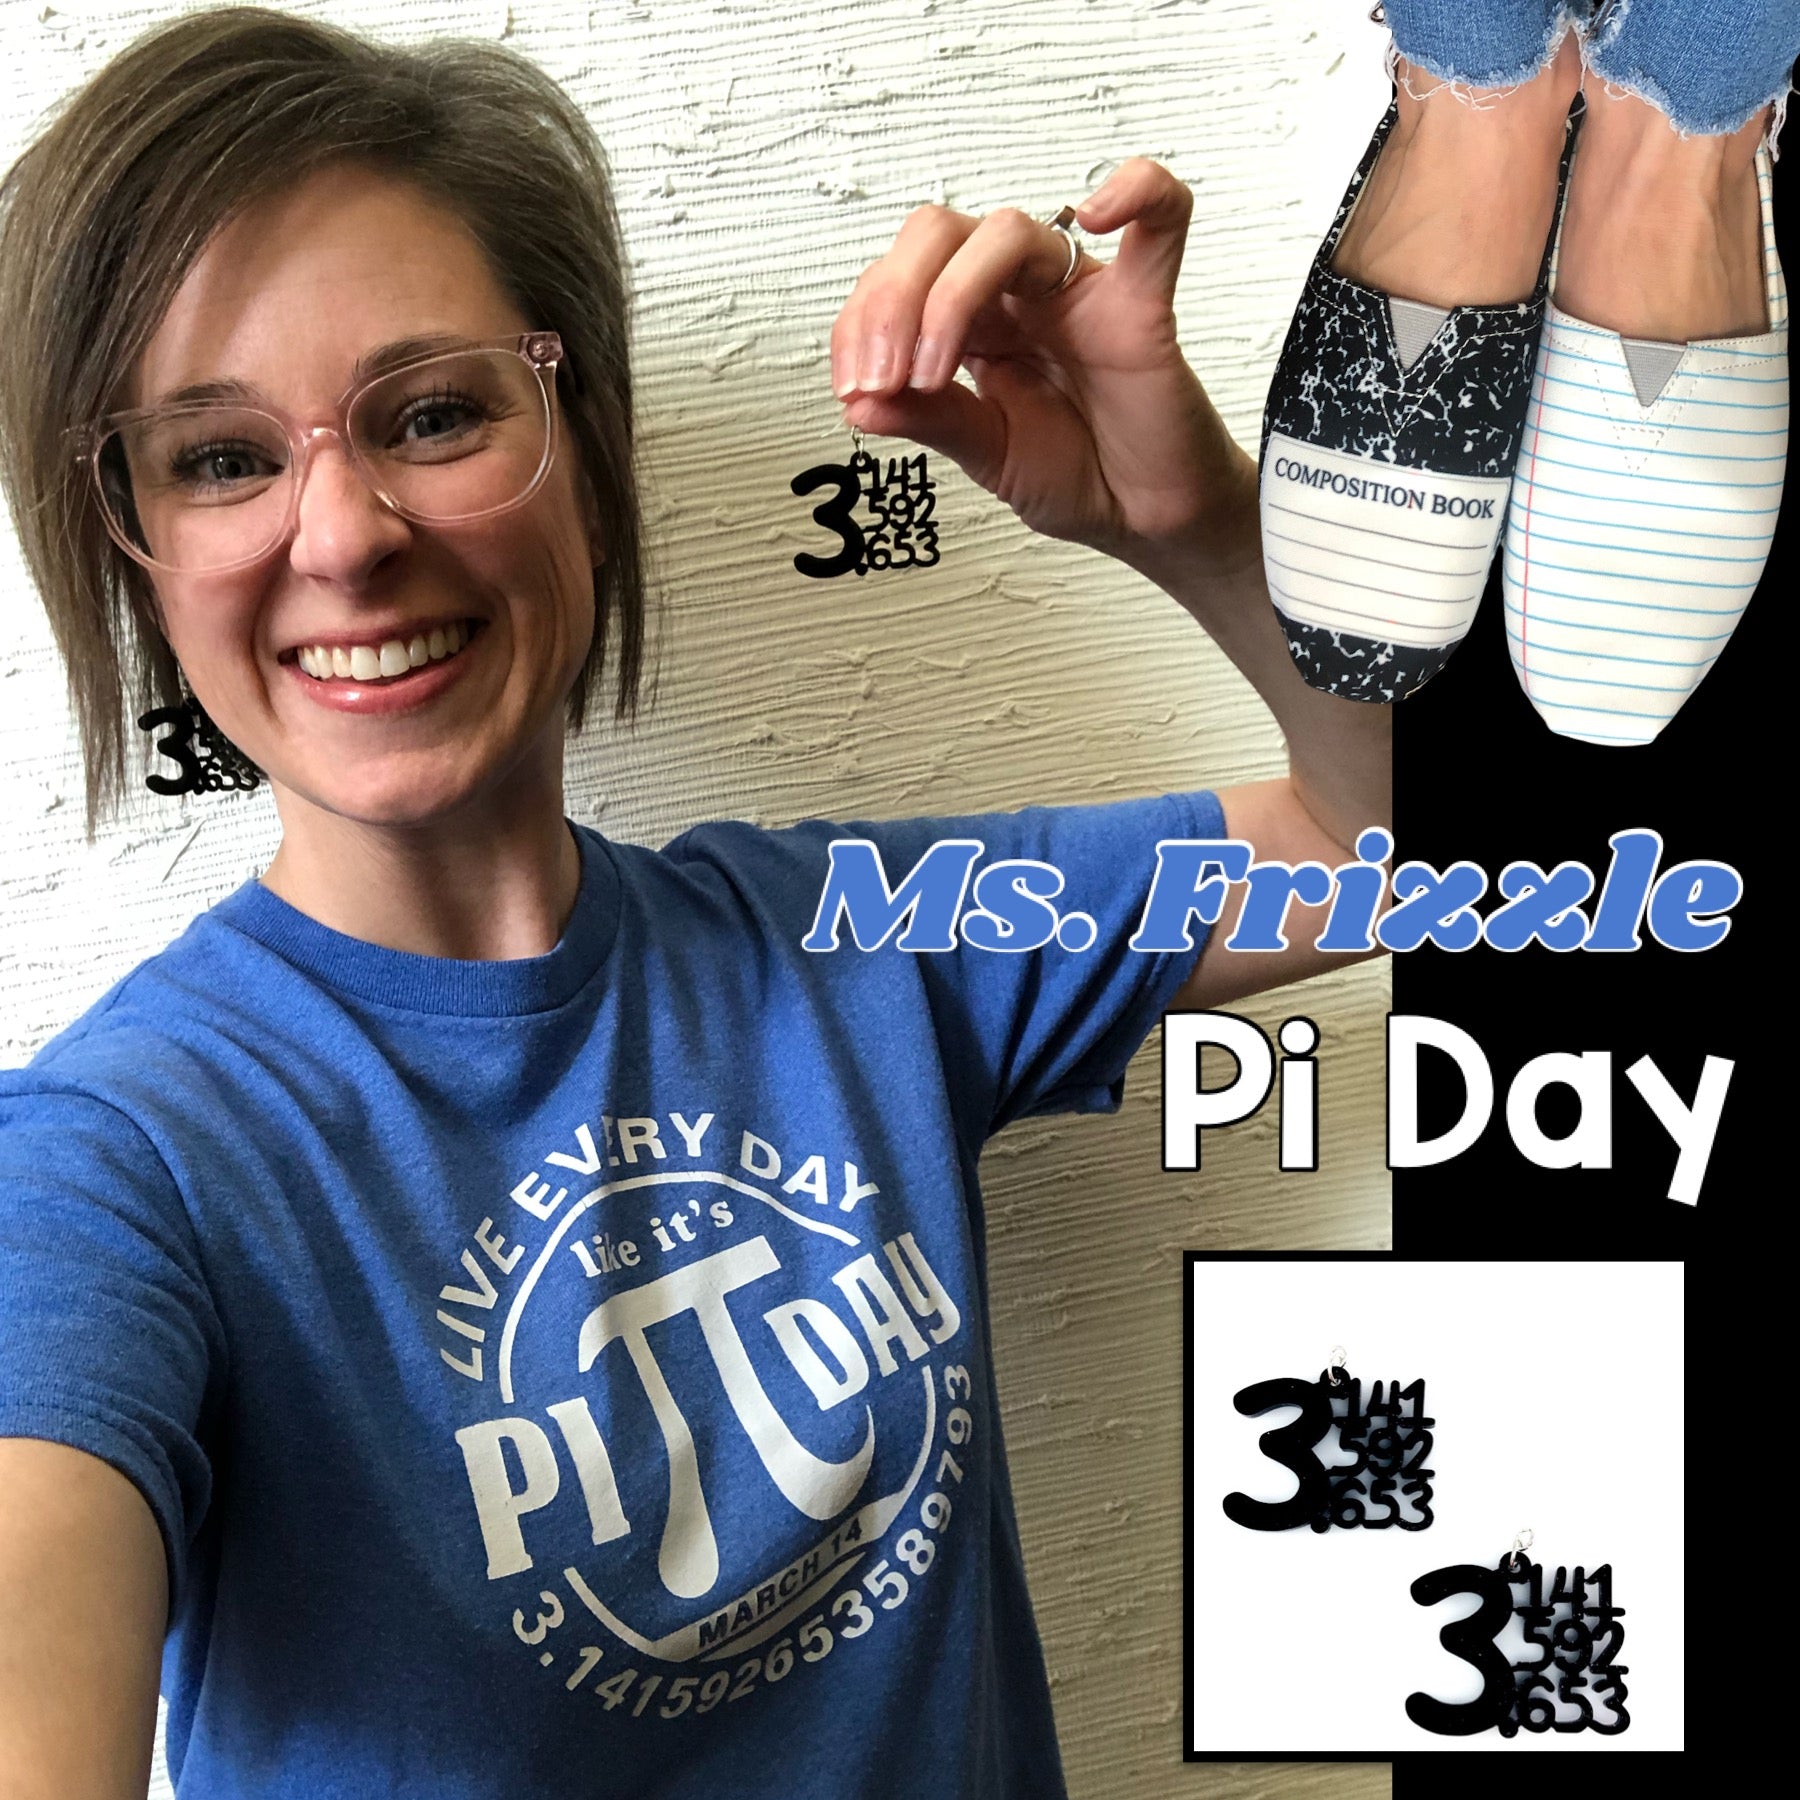 Exaggerated Pi Earrings (Dangles) - Ms. Frizzle Pi Day 3.14 3/14 - teacher earrings